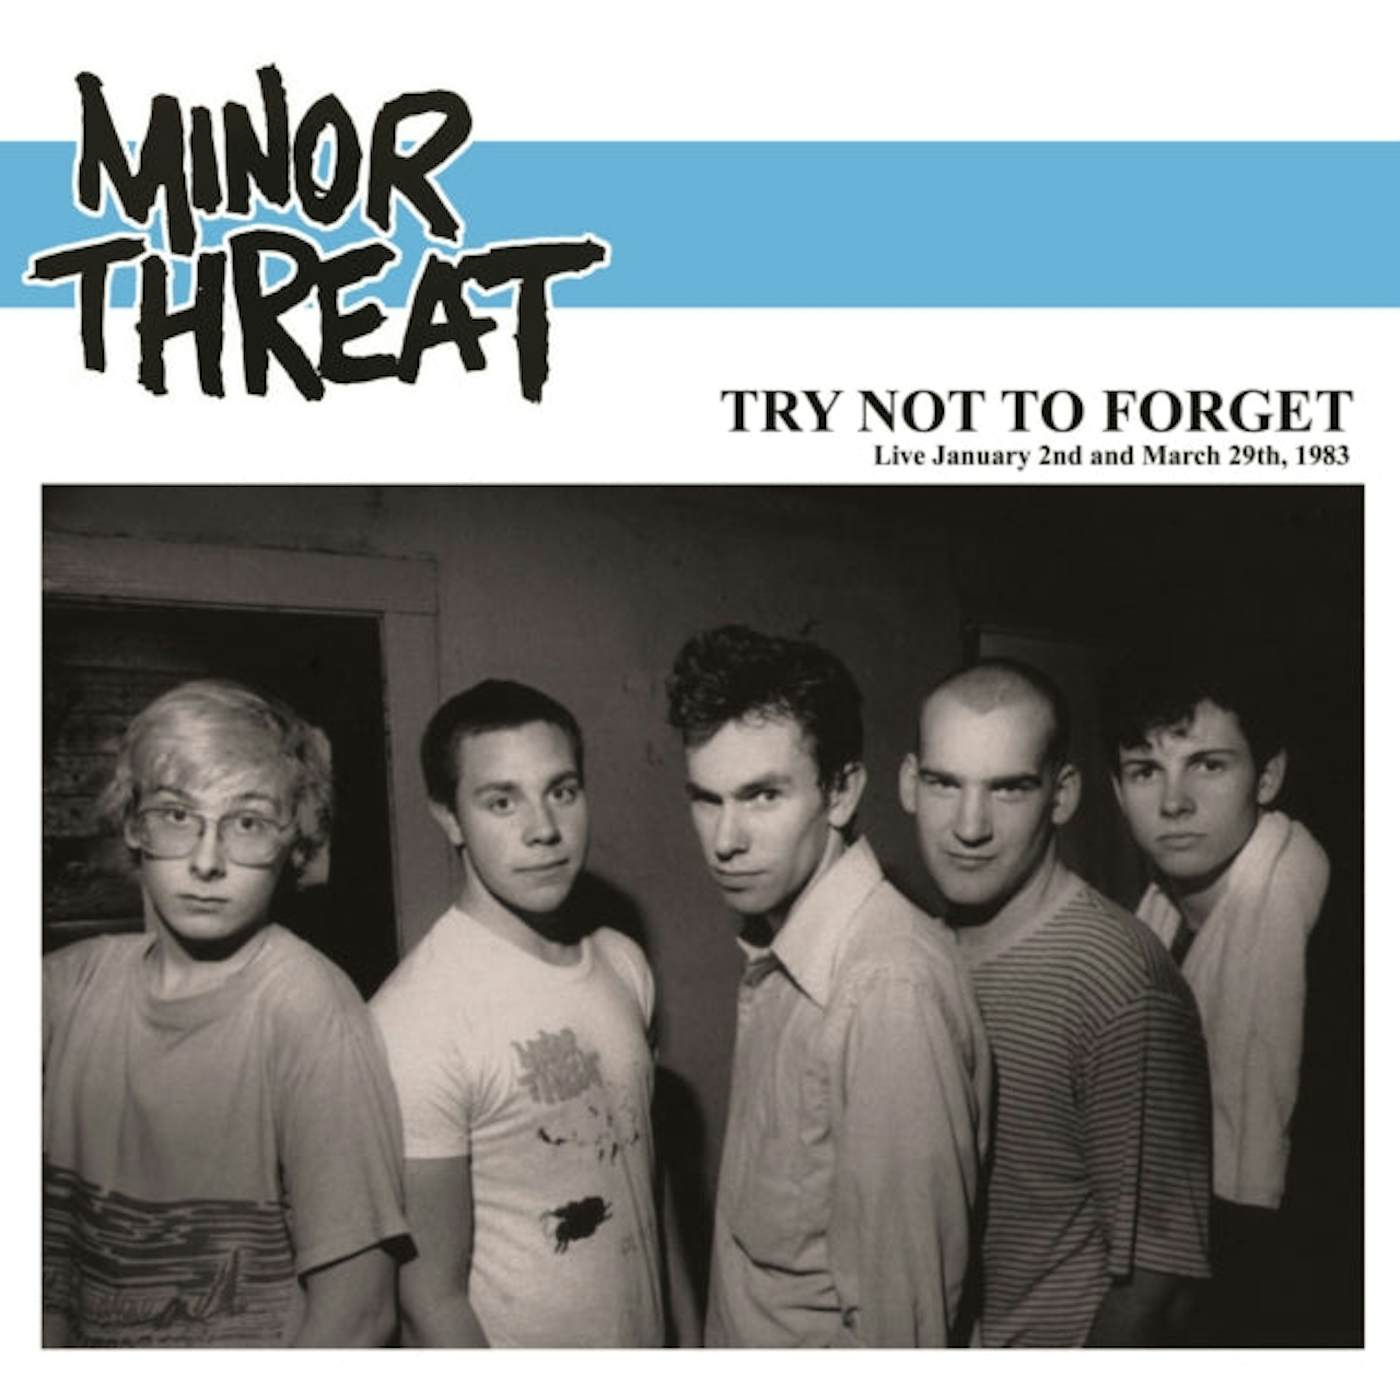 Minor Threat LP Vinyl Record  Try Not To Forget  Live January 2nd And March 29th. 19 83